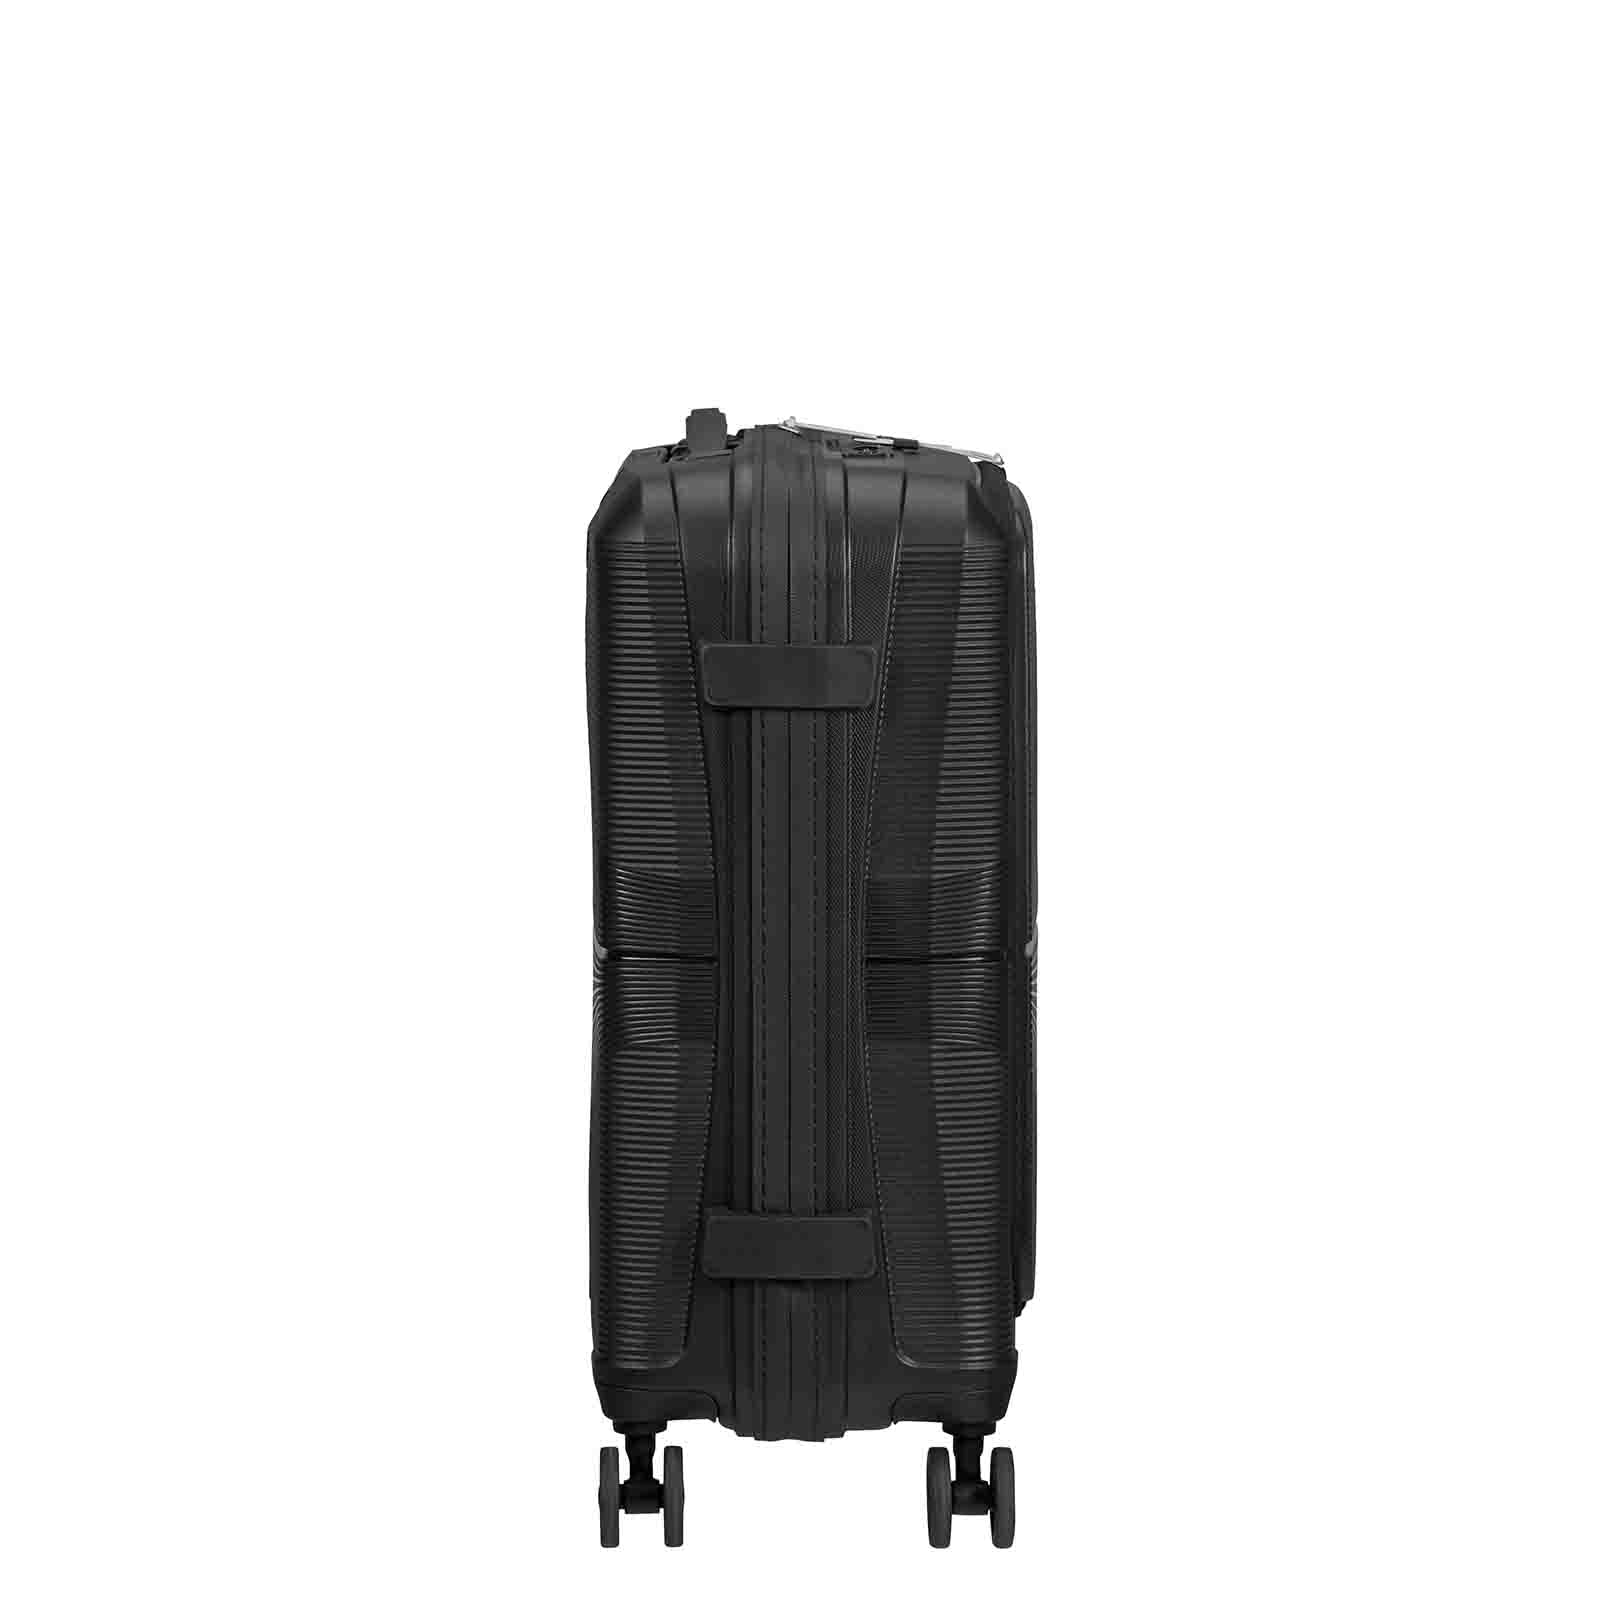 American-Tourister-Airconic-55cm-Suitcase-Front-Opening-Onyx-Black-Side-LH